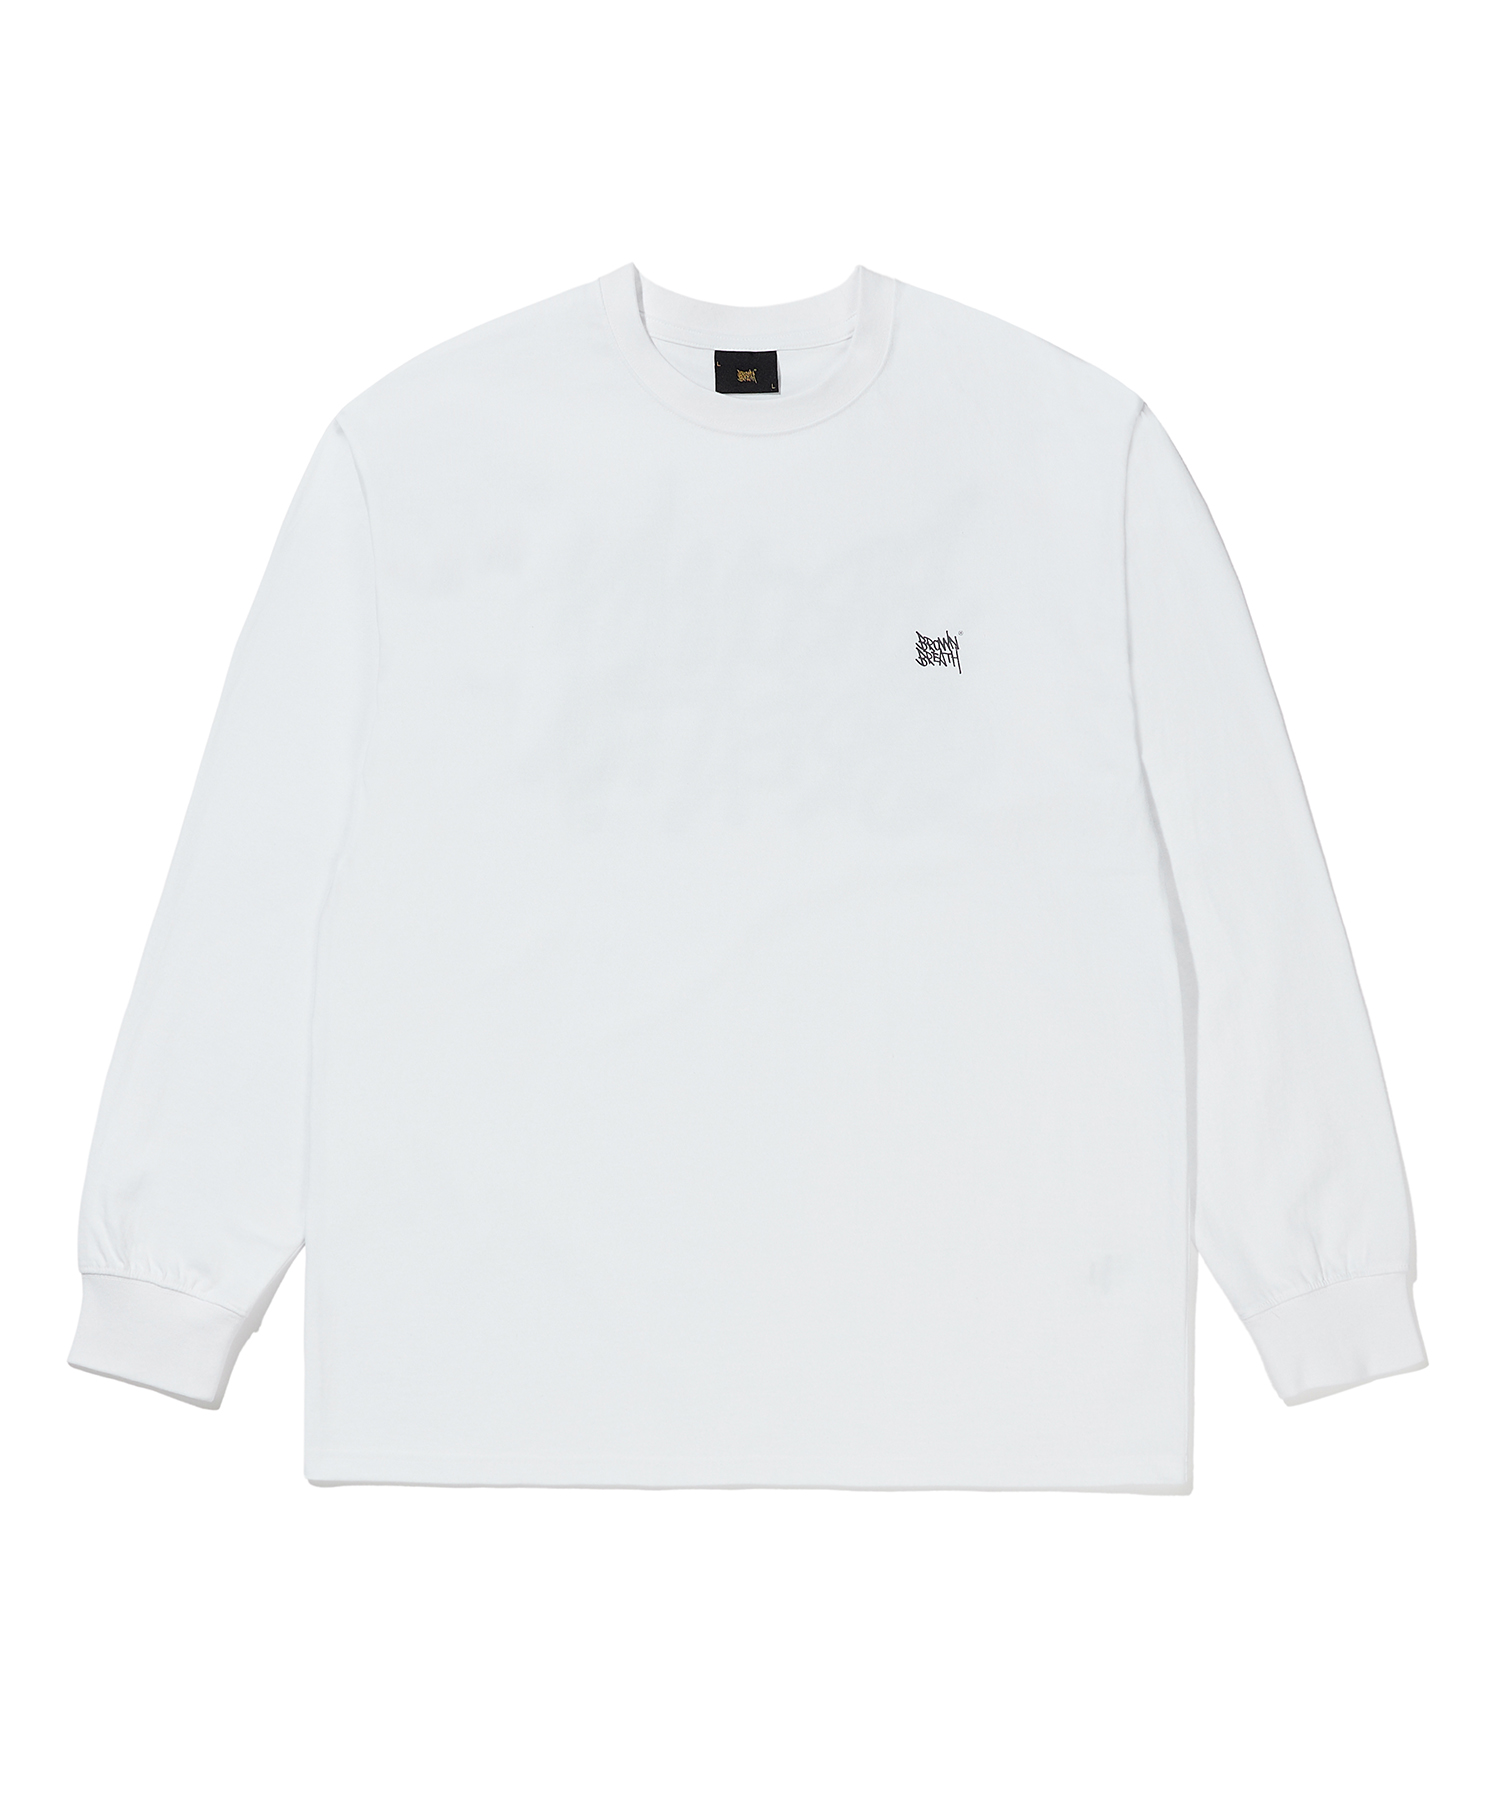 [ONLINE EXCLUSIVE] PAISLEY TAG LONGSLEEVE - WHITE